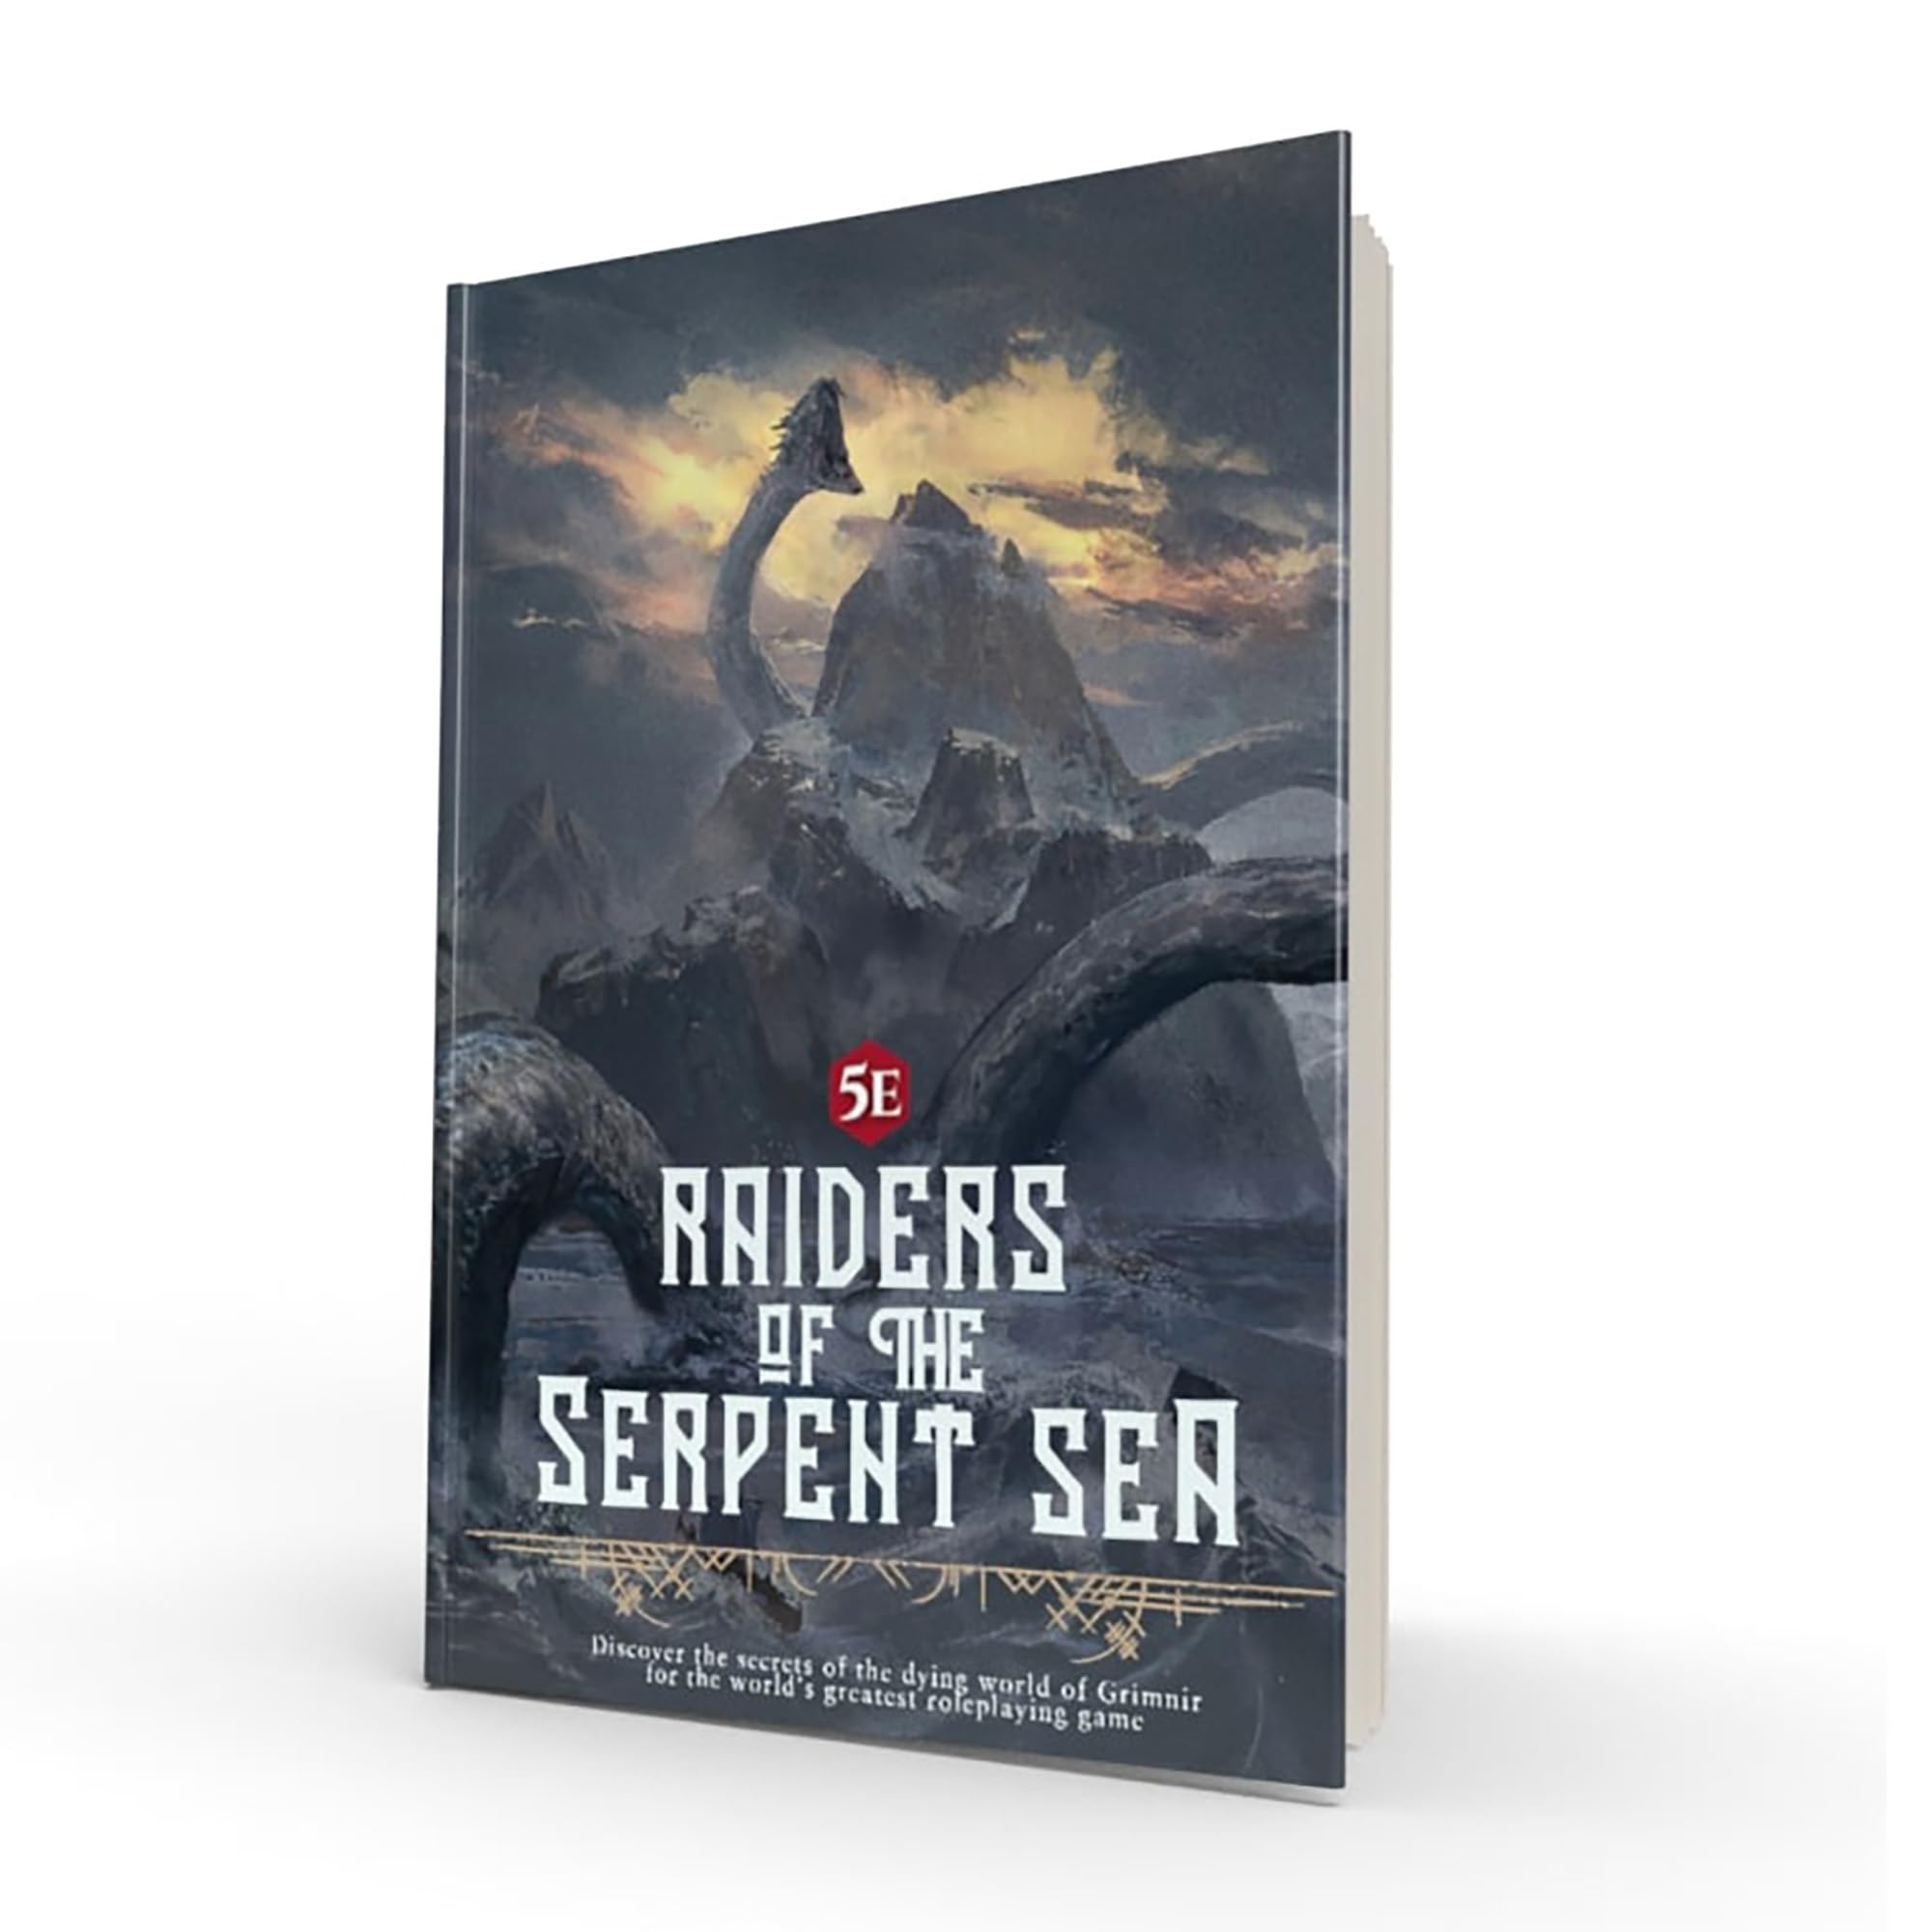 Modiphius Entertainment: Raiders of The Serpent Sea: Campaign Guide (5E) - Hardcover RPG Book, Roleplaying Game, Takes 4-6 Players from Level 1 - 16